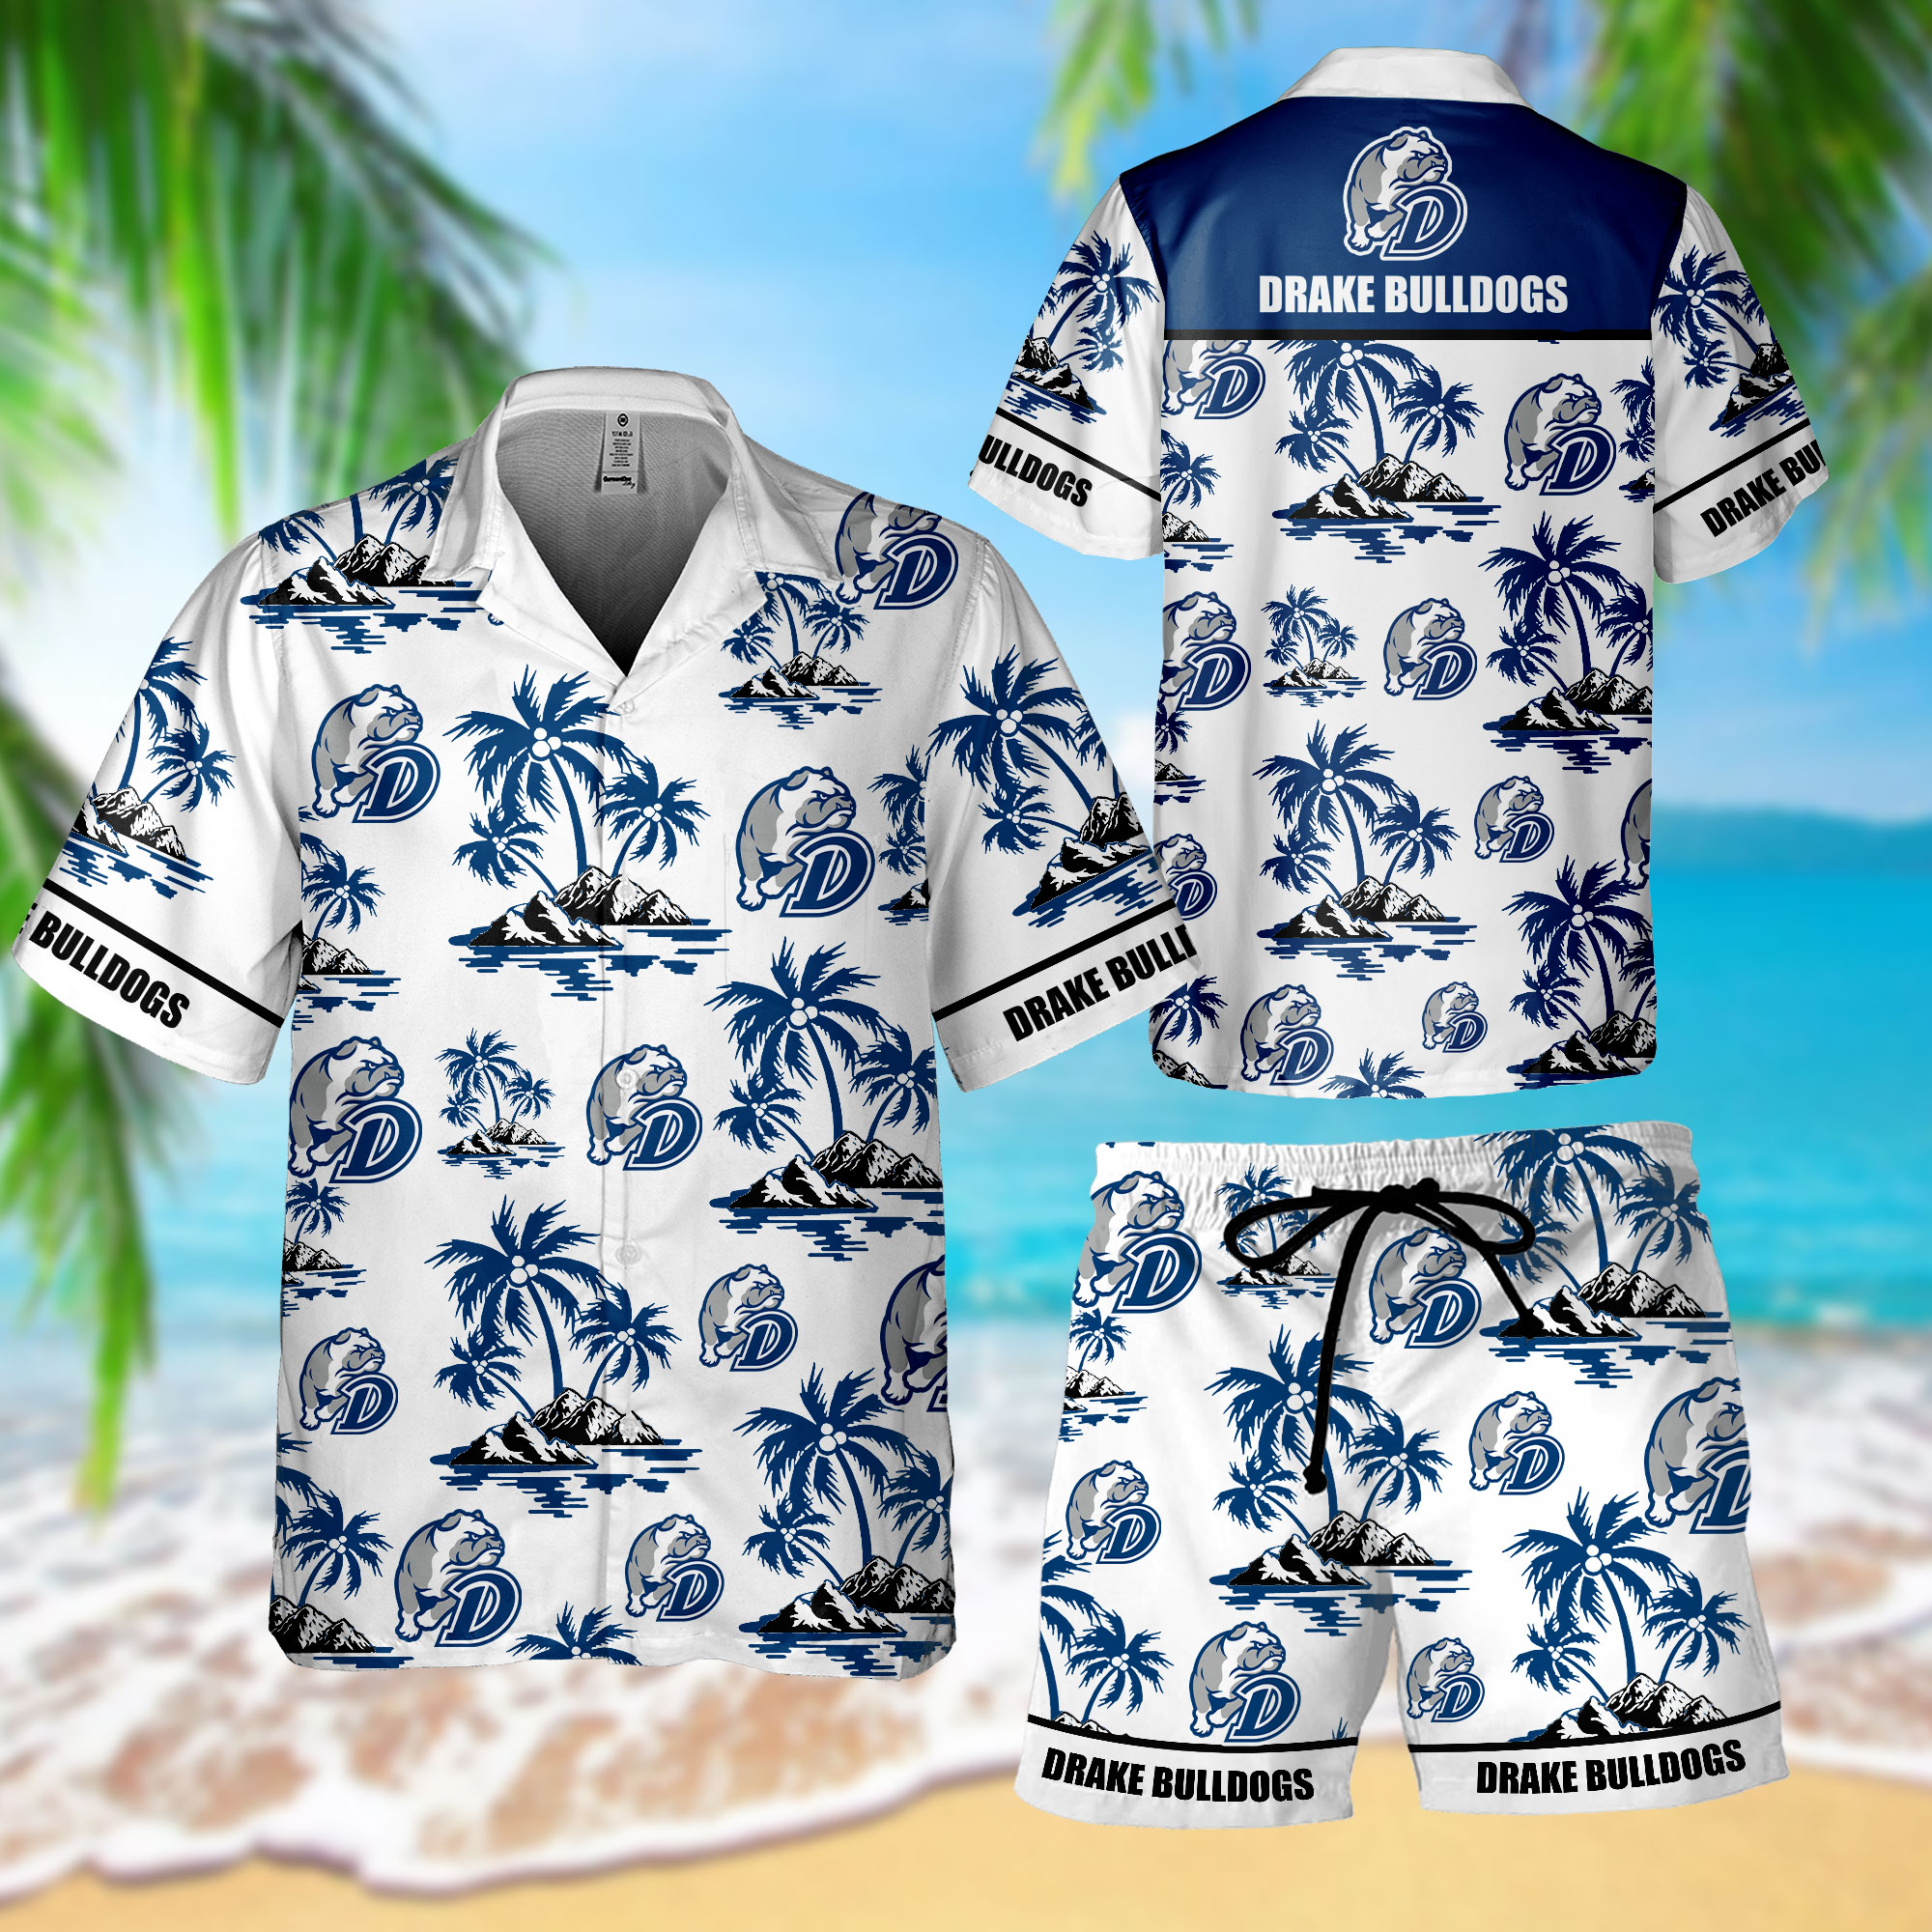 Let me show you about some combo hawaiian shirt so cool in this weather 35